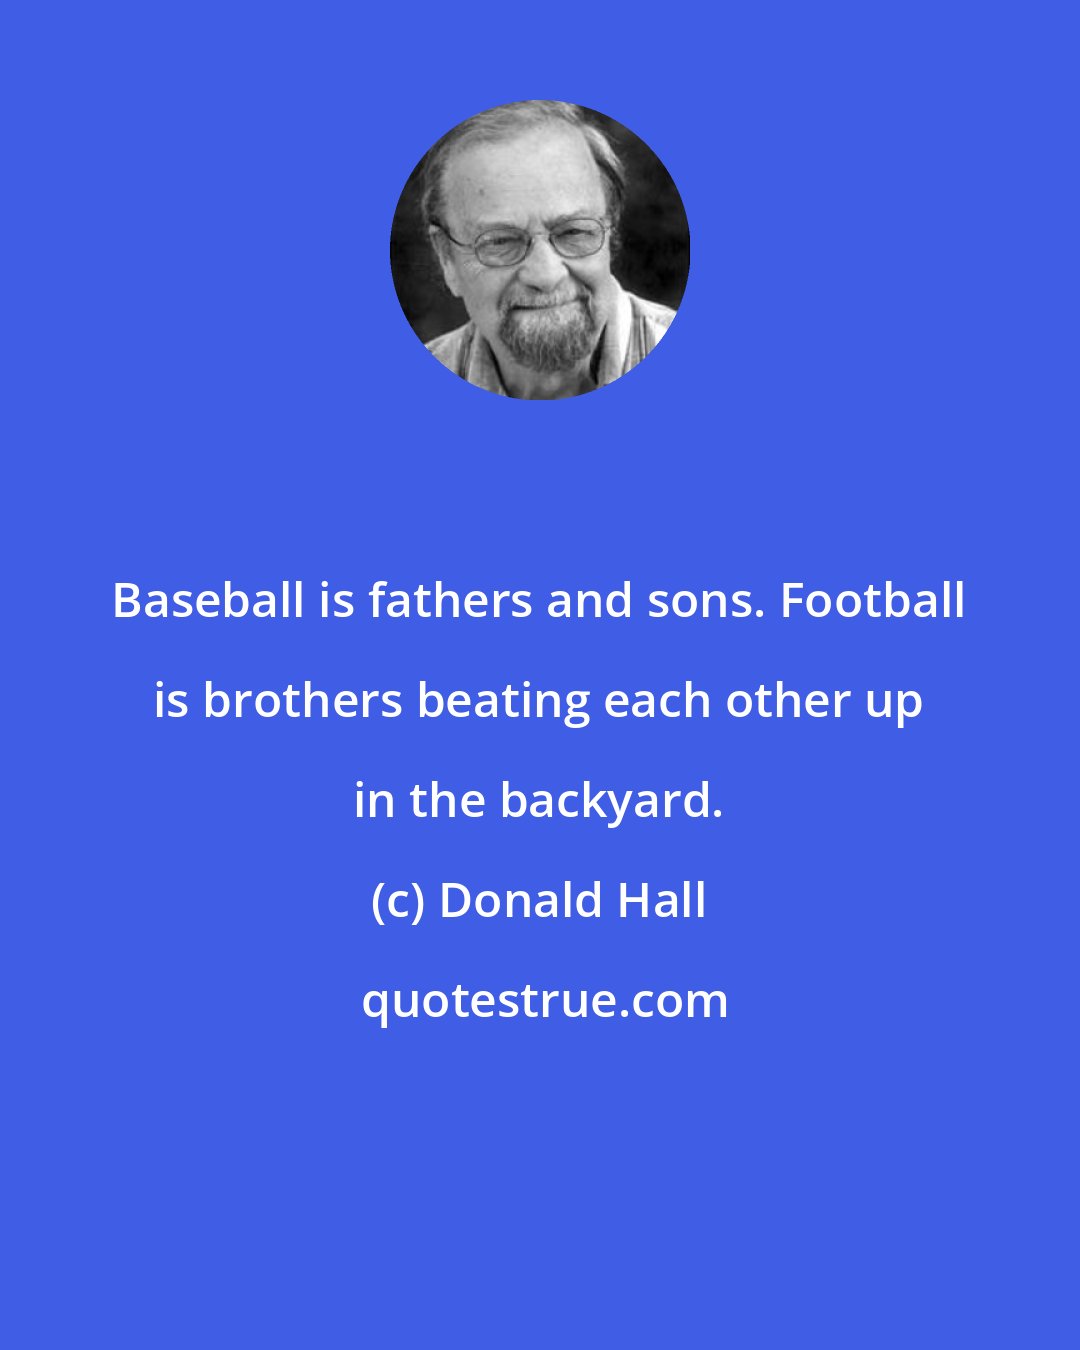 Donald Hall: Baseball is fathers and sons. Football is brothers beating each other up in the backyard.